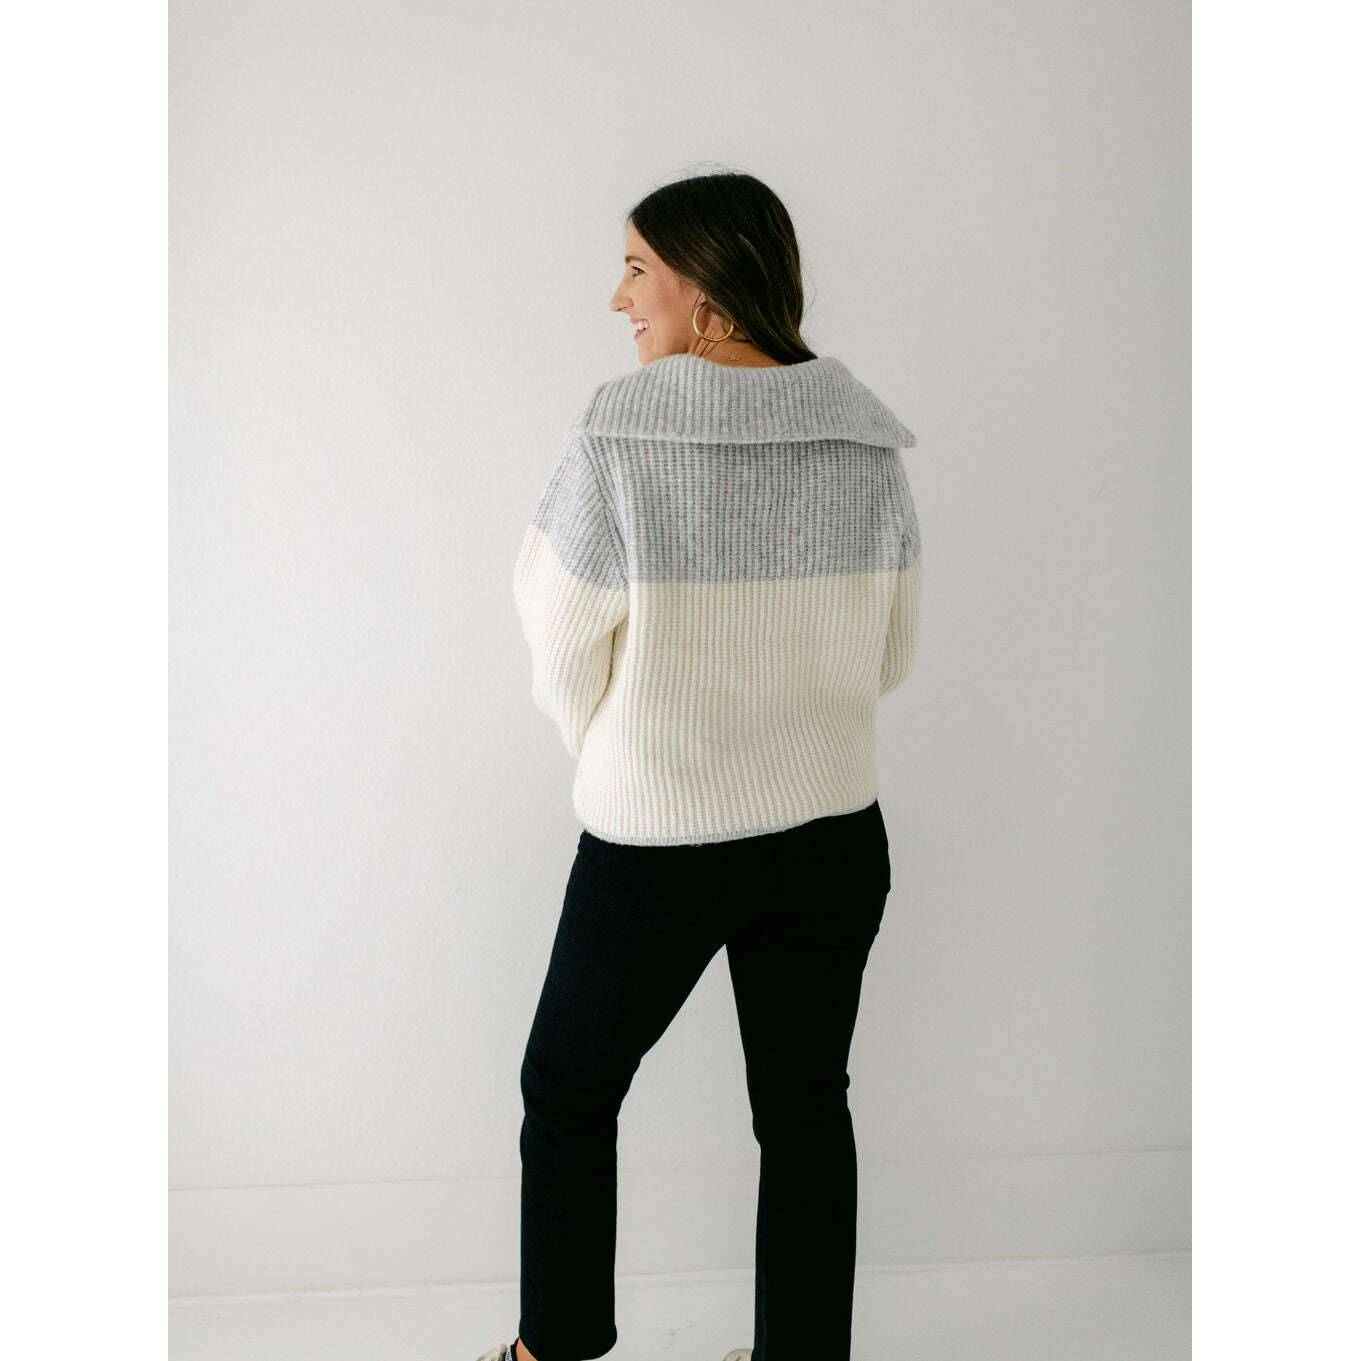 8.28 Boutique:Z Supply,Z Supply Canyon Blocked Sweater,Sweaters